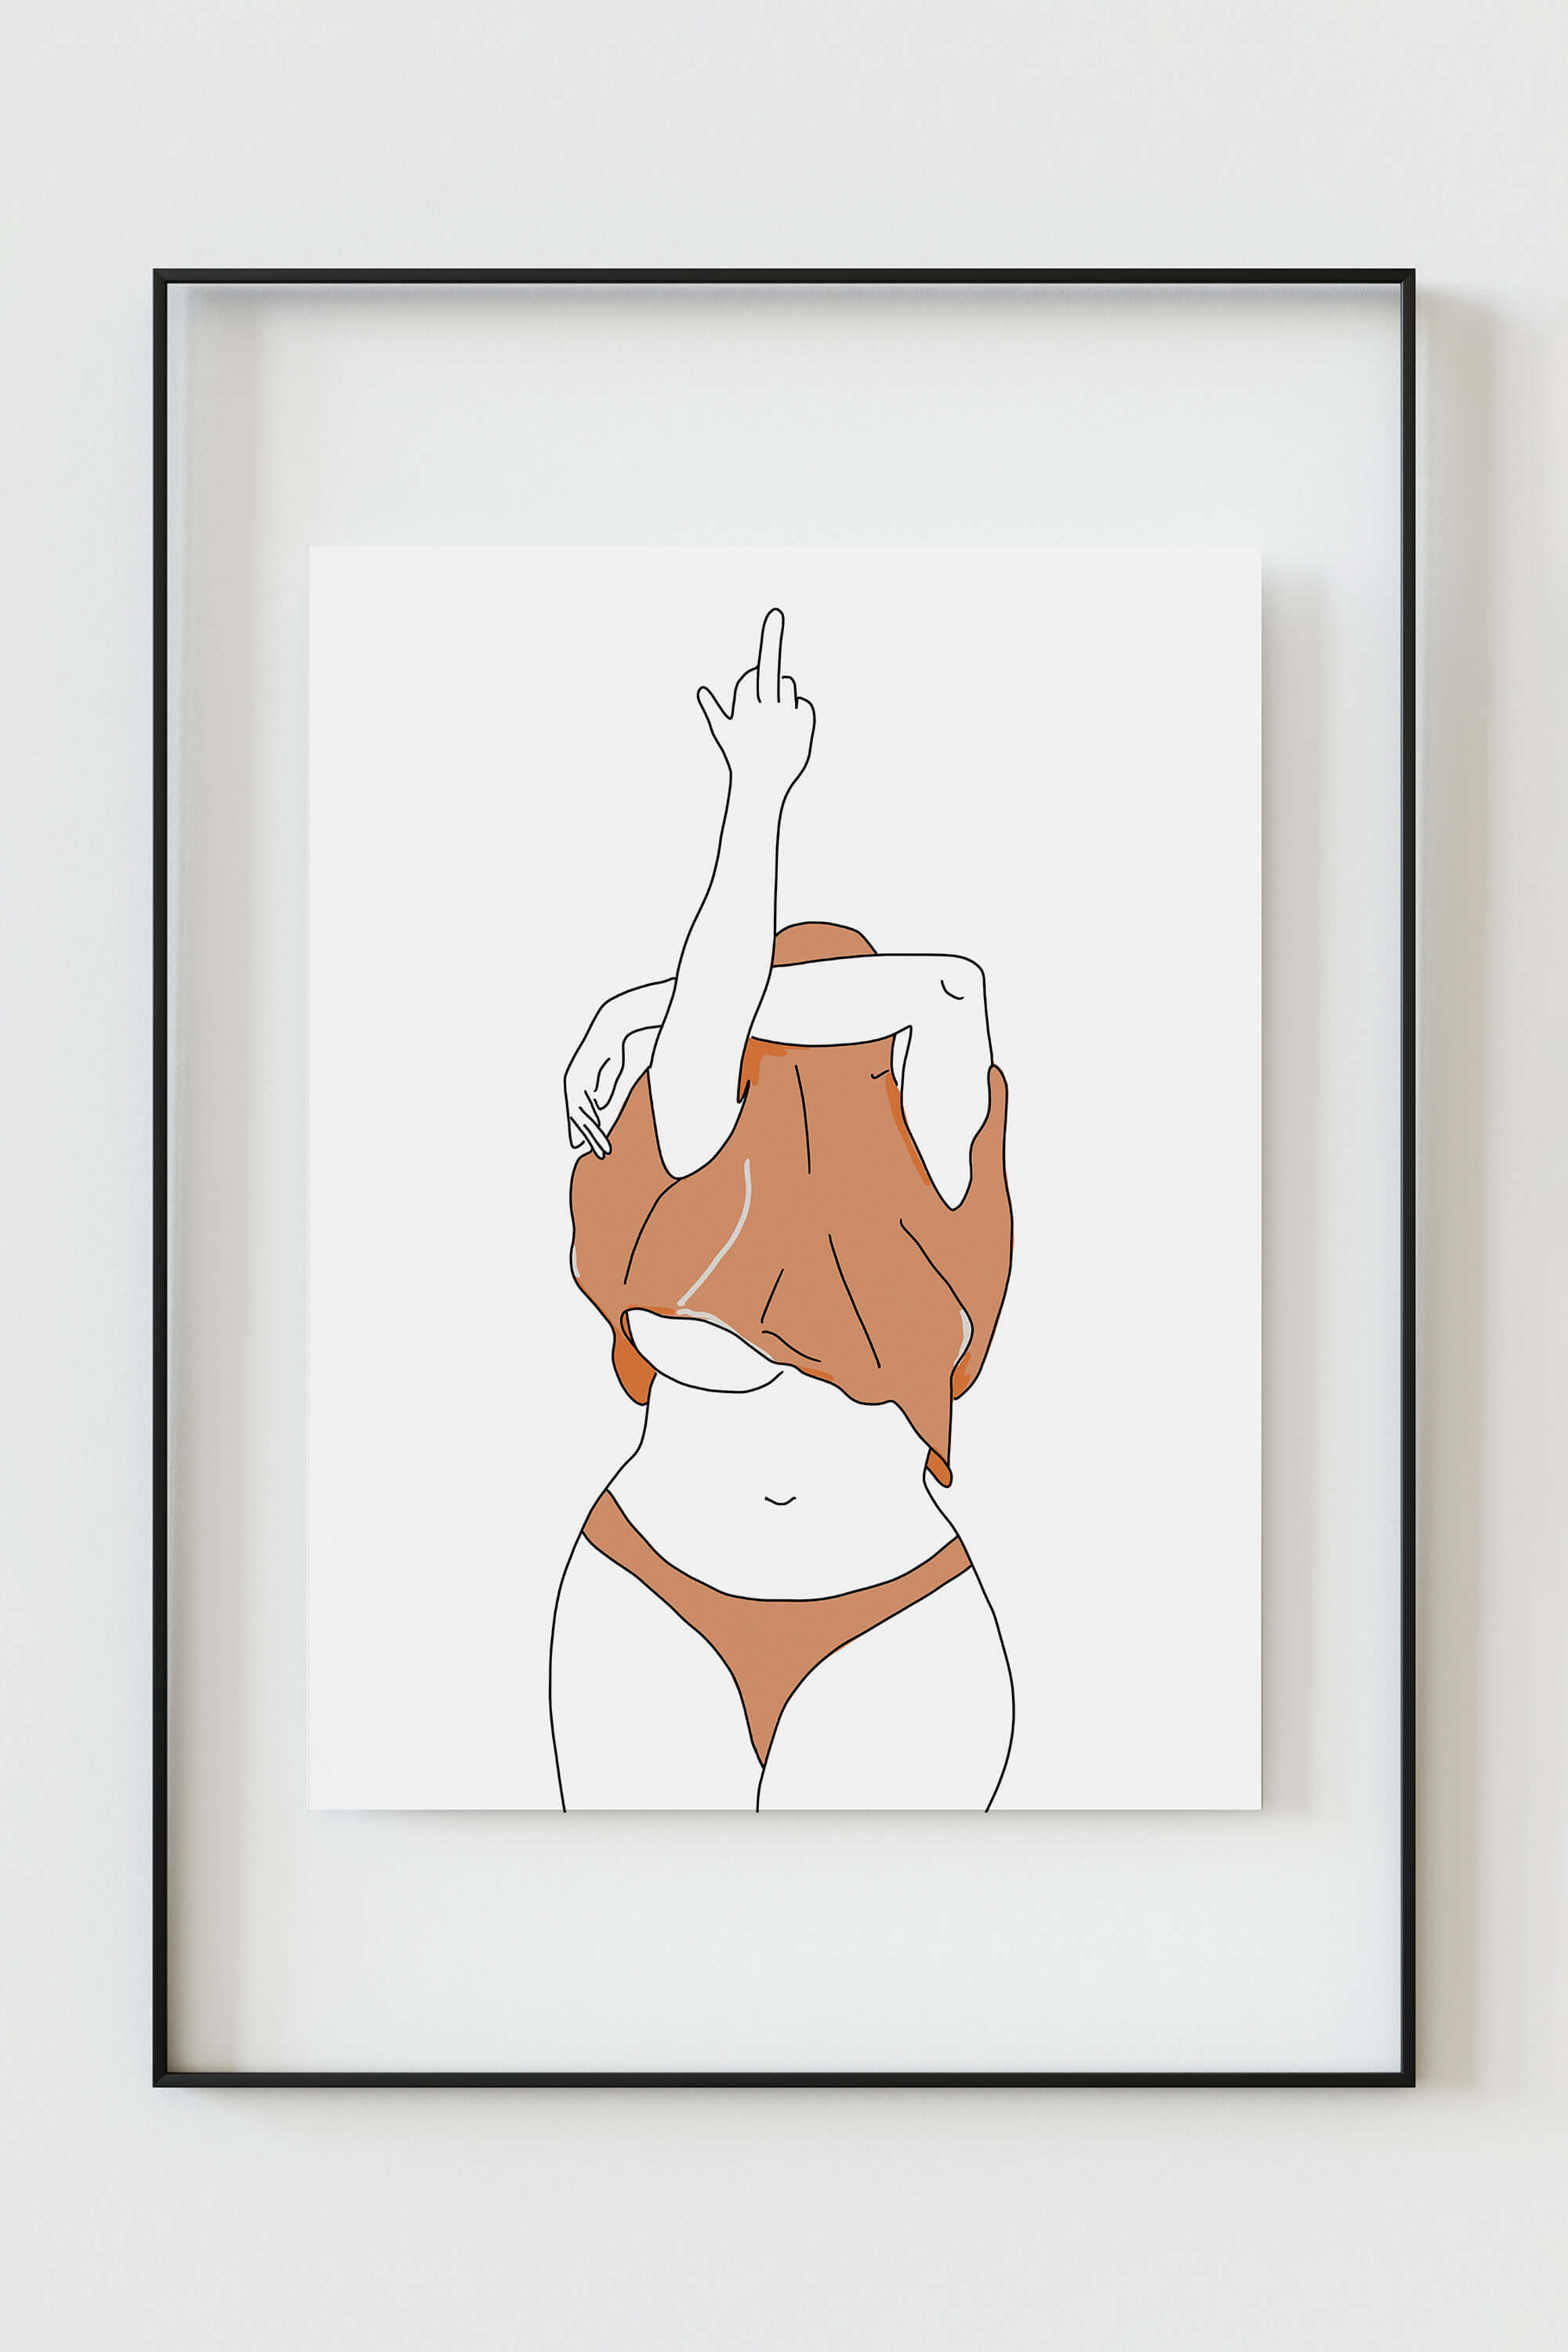 Curvy plus-size woman illustration embracing self-love and body positivity, perfect for modern and intimate bedroom decor.